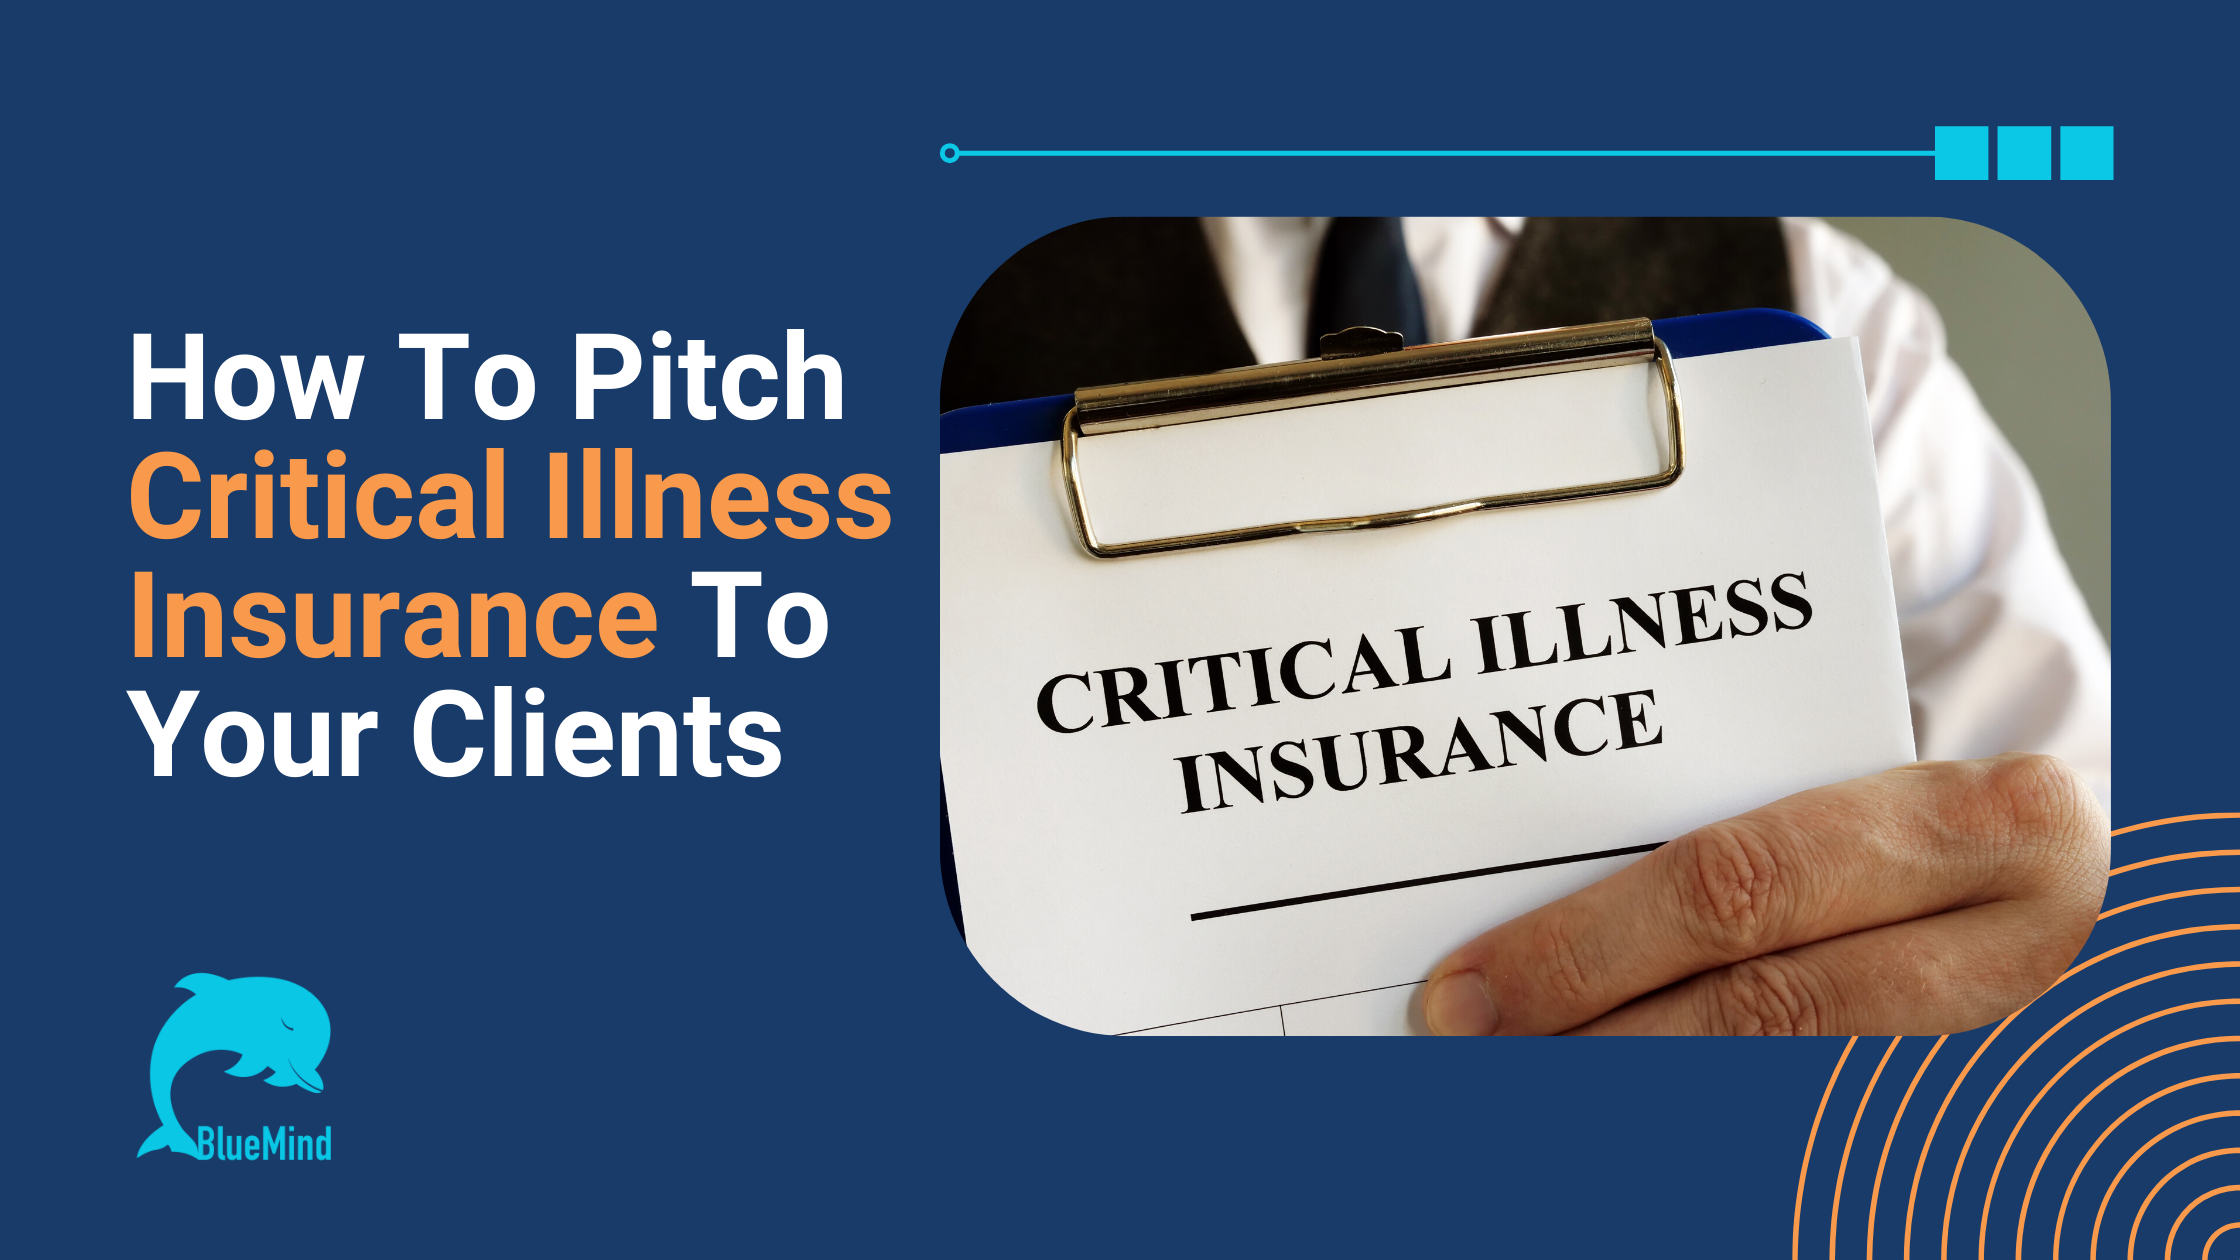 How-To-Pitch-Critical-Illness Insurance-To-Your Clients-blog-banner